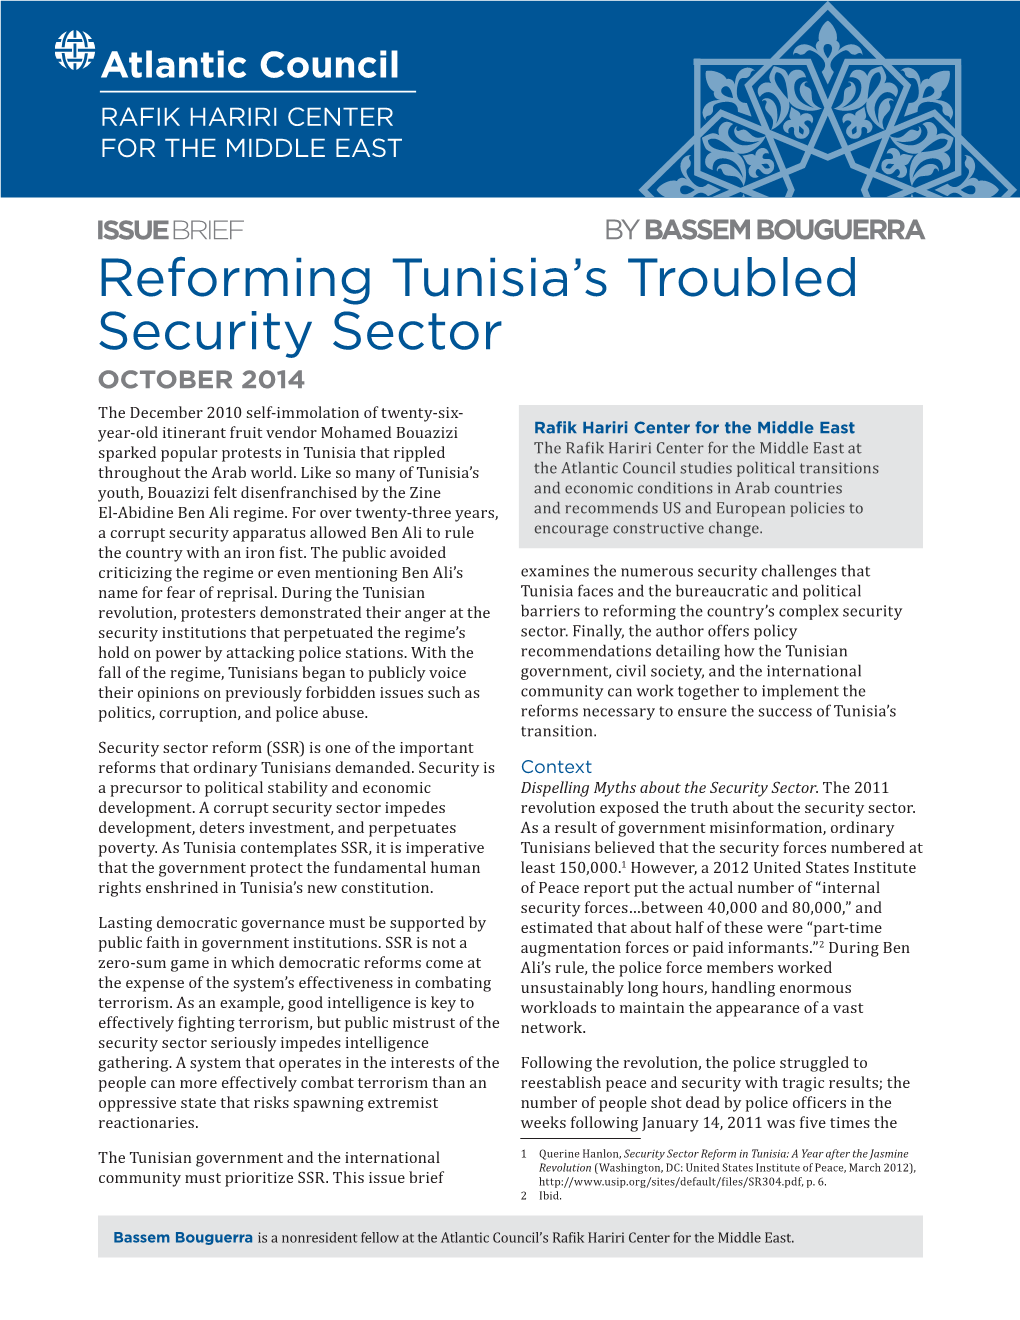 Reforming Tunisia's Troubled Security Sector